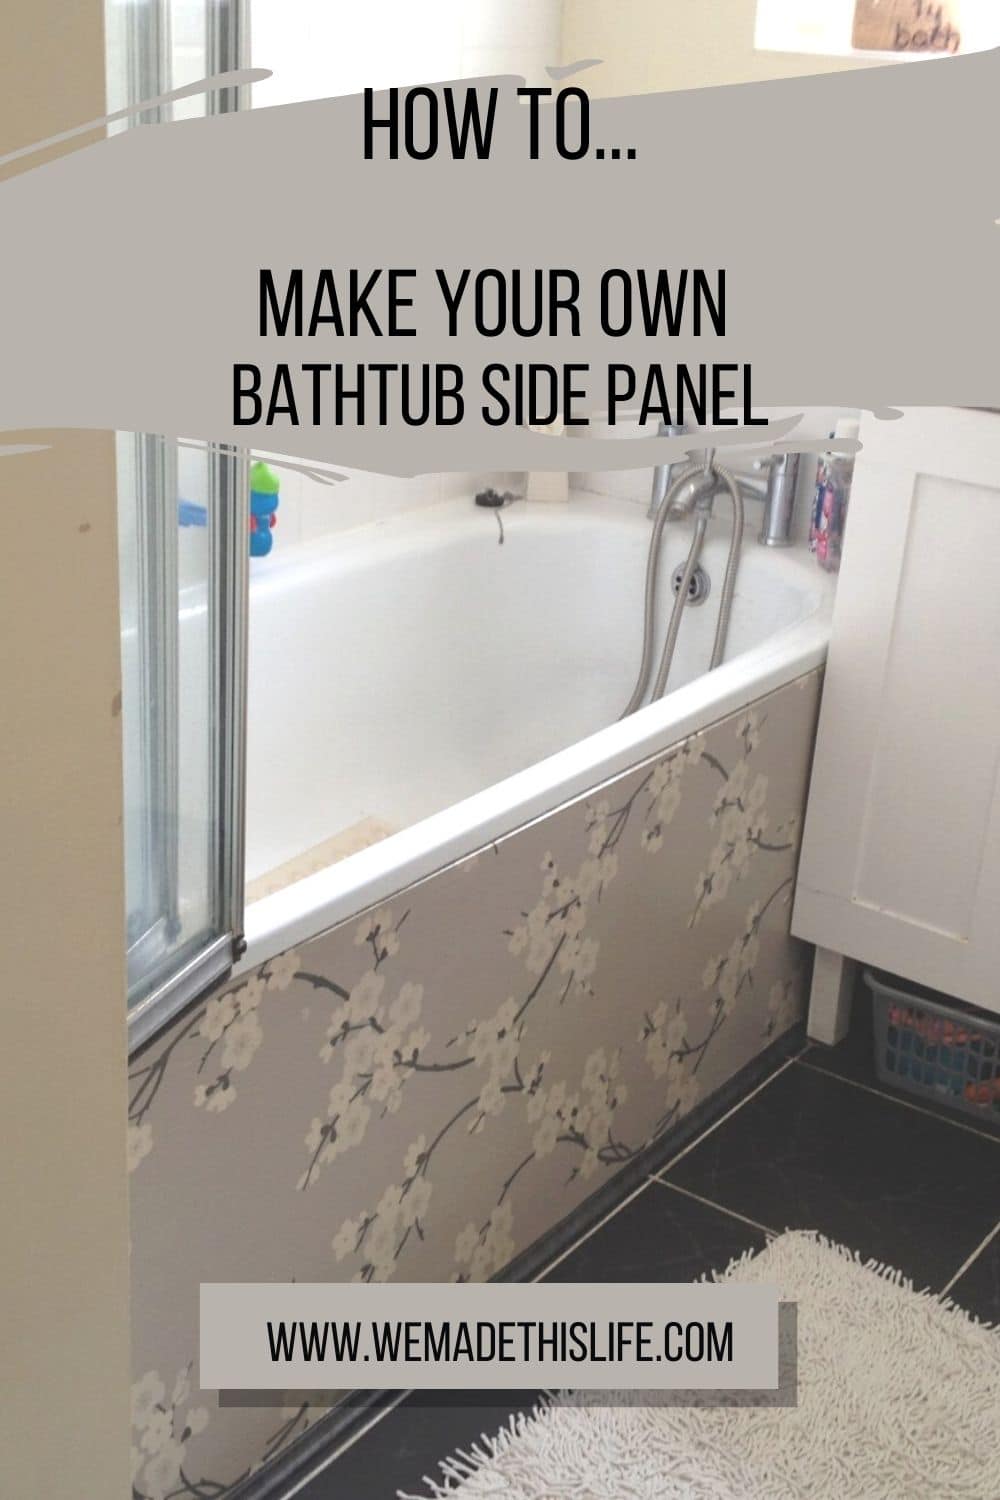 How To Make Your Own Bathtub Side Panel
